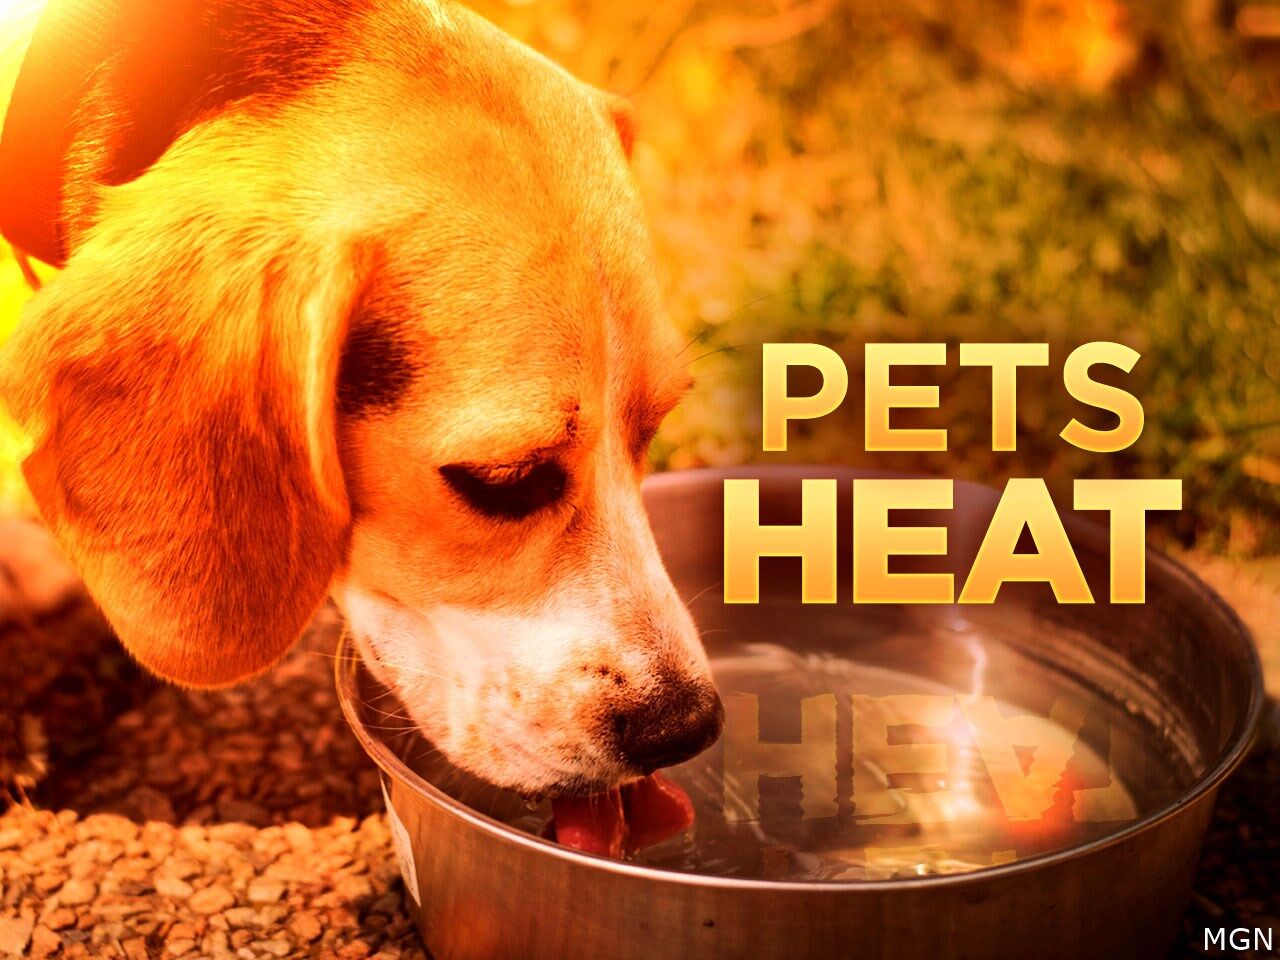 do dogs stop eating in hot weather